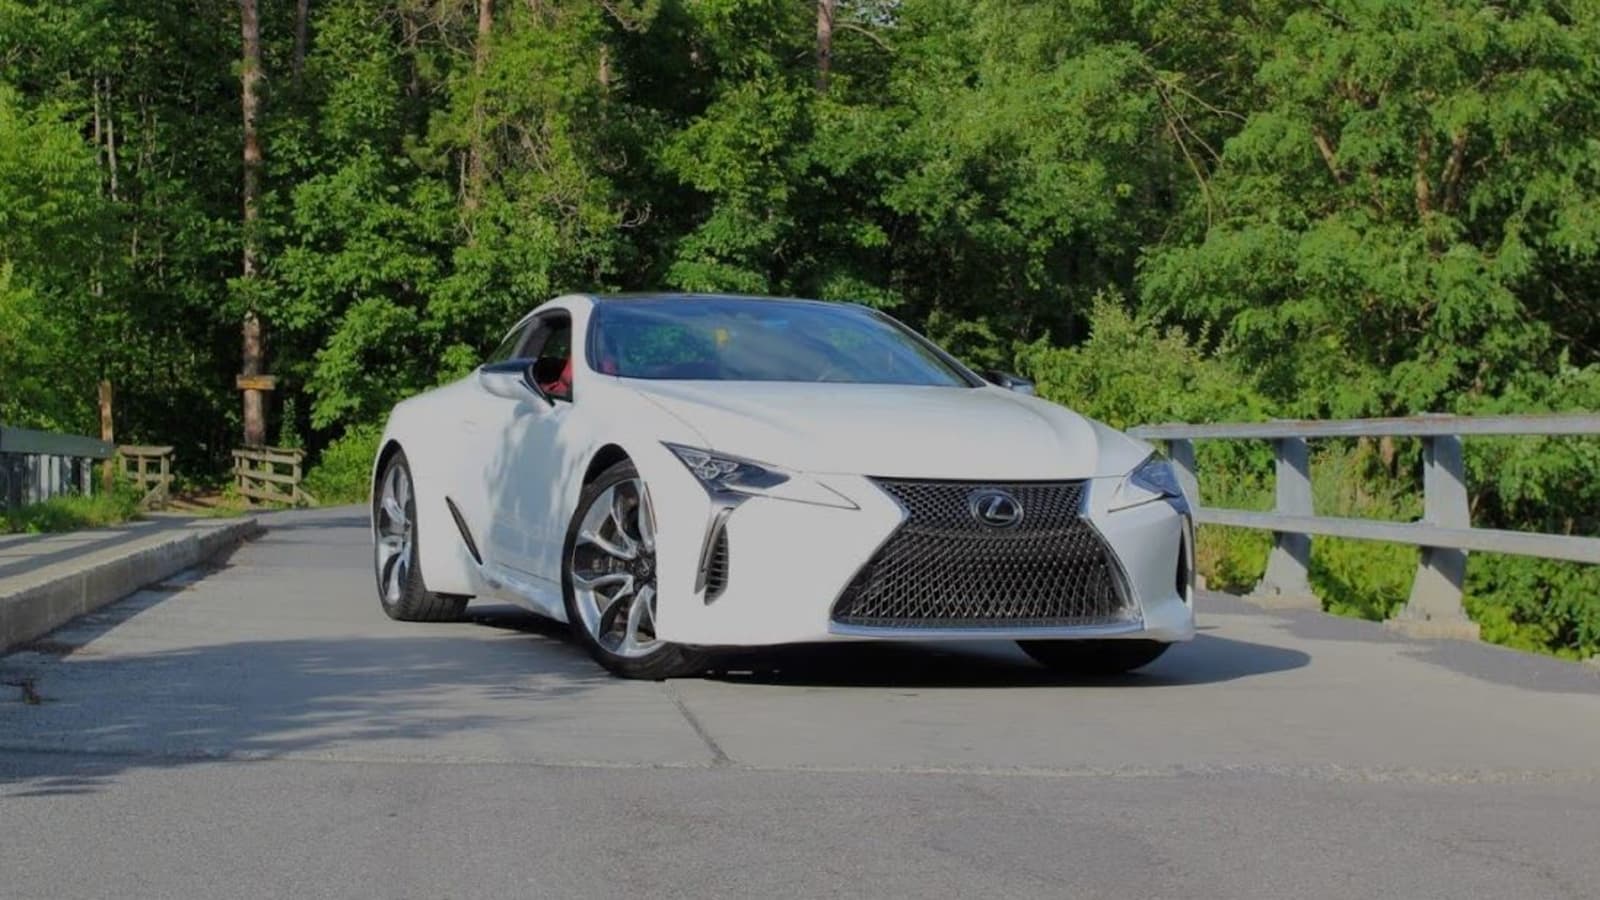 The 2018 Lexus Lc 500 Is My Favorite Super Coupe